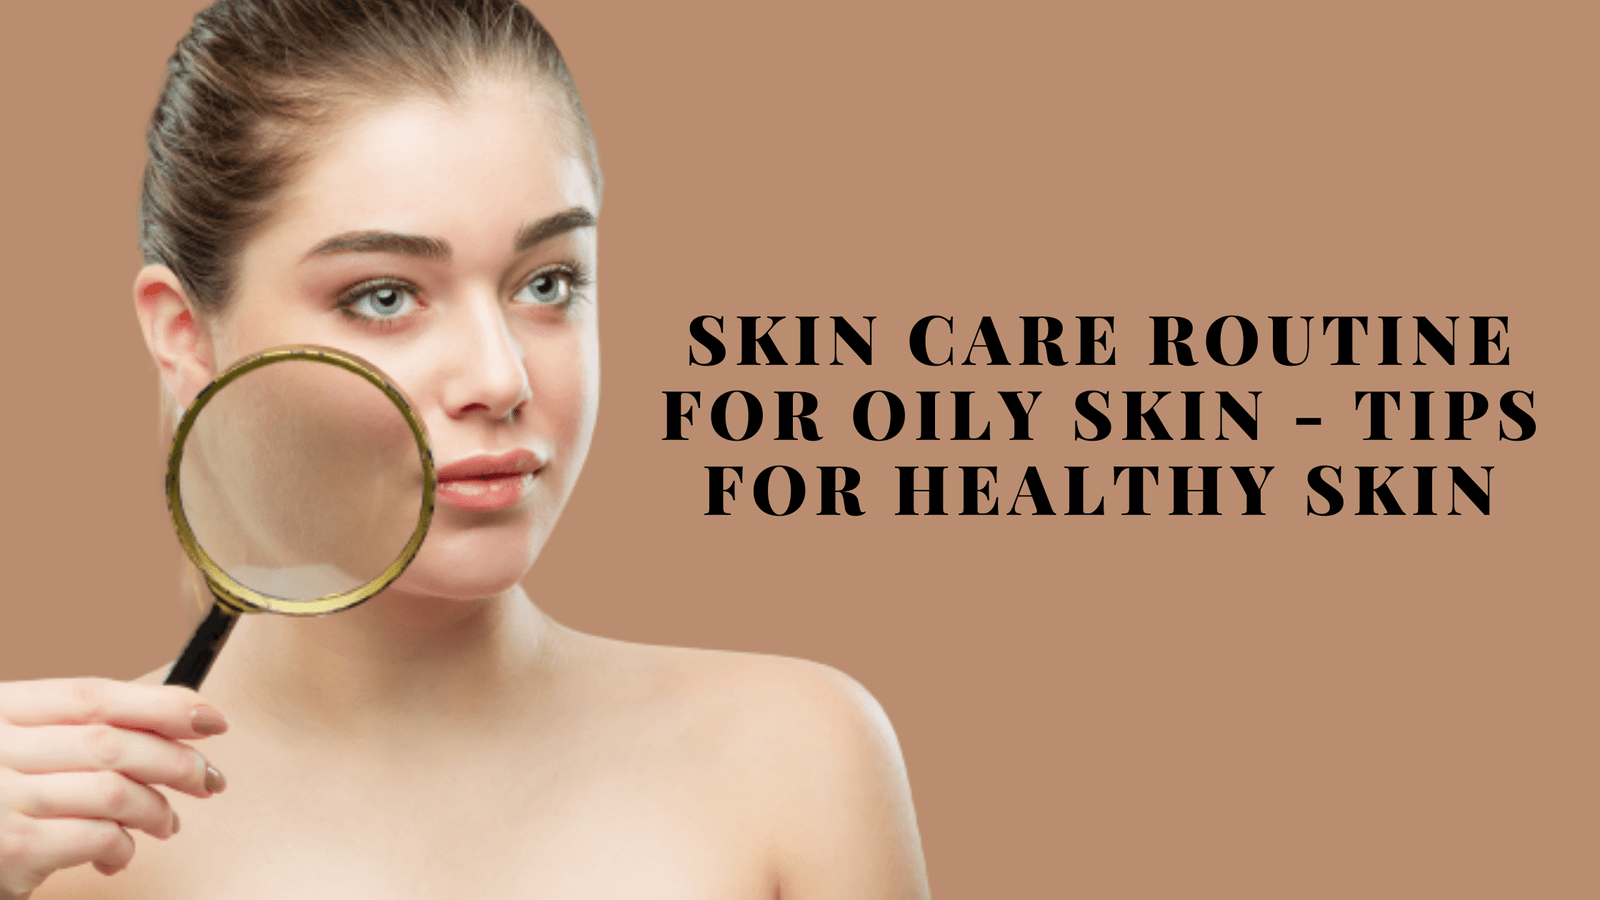 Skin Care Routine for Oily Skin - Tips for Healthy Skin